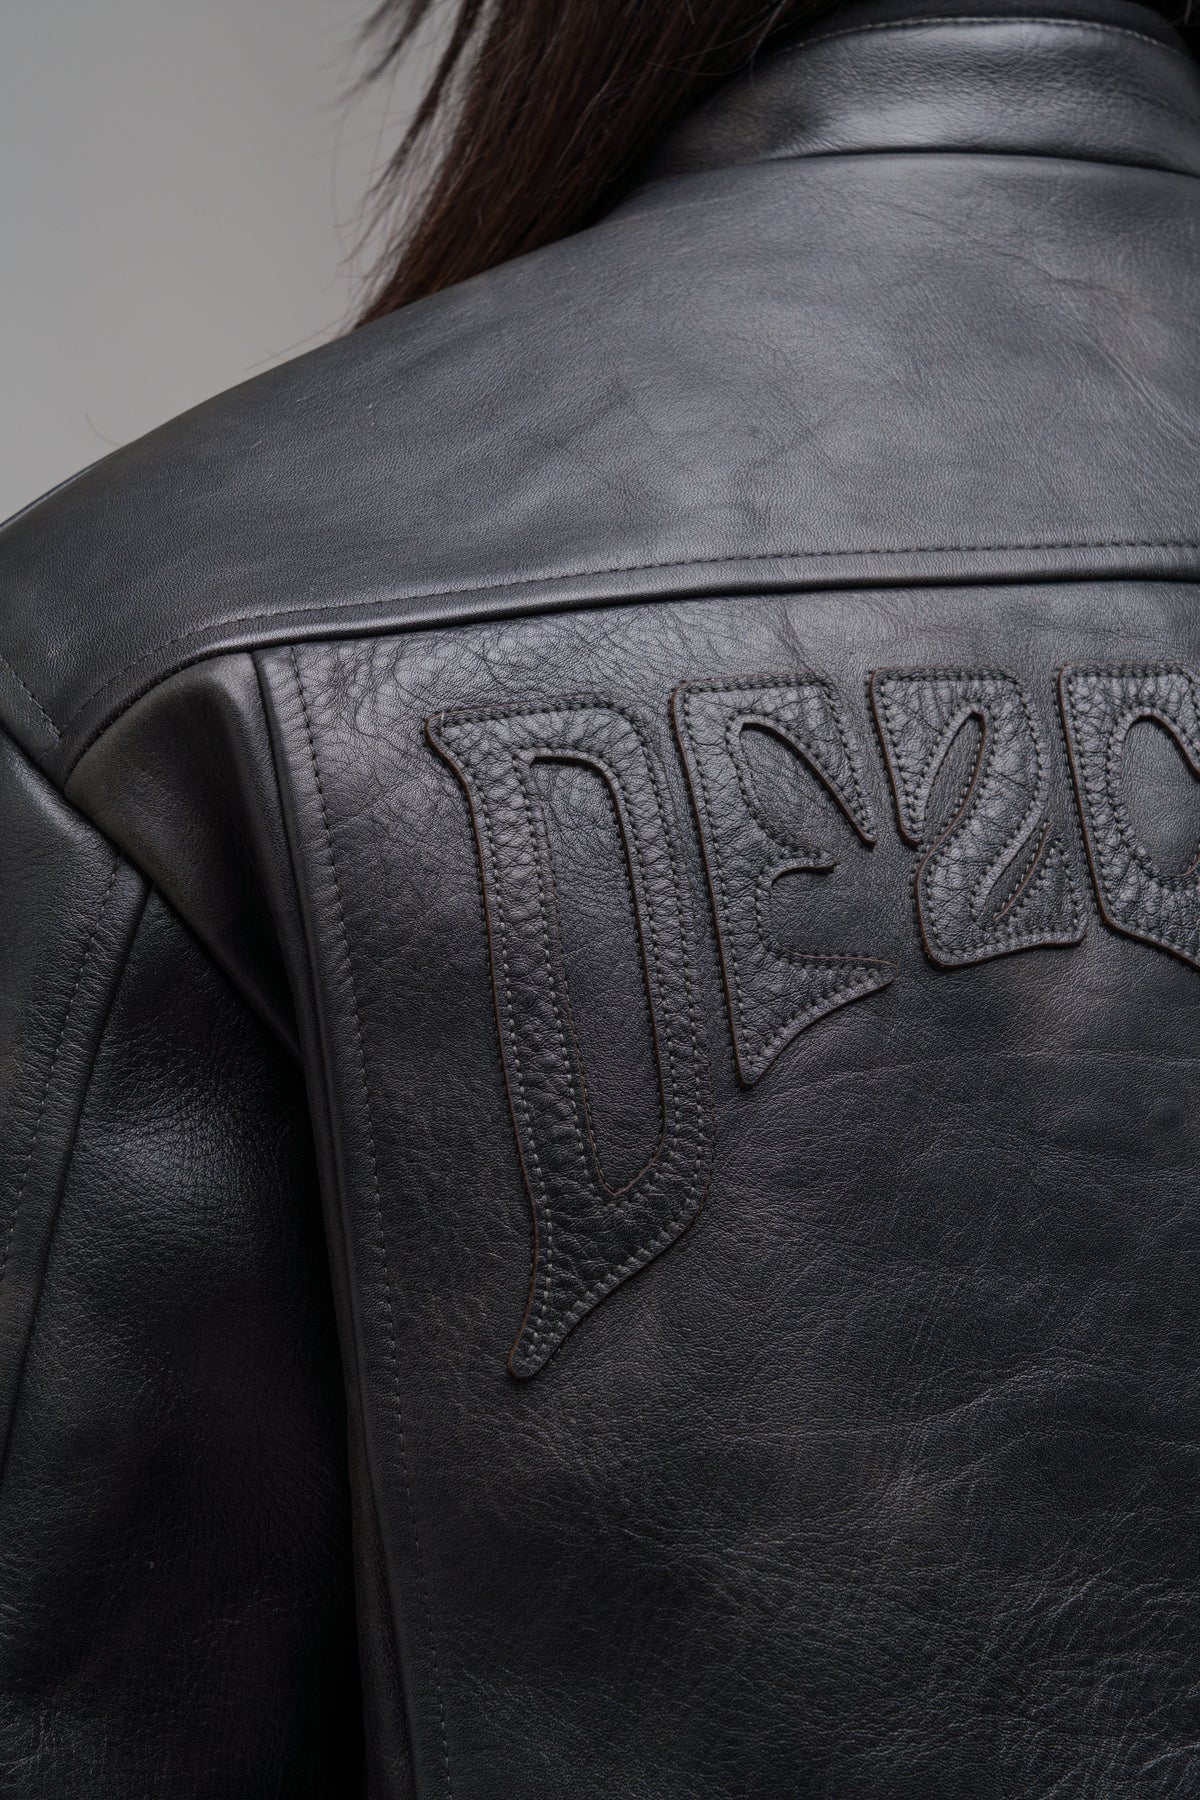 "ATTRITION" LEATHER JACKET